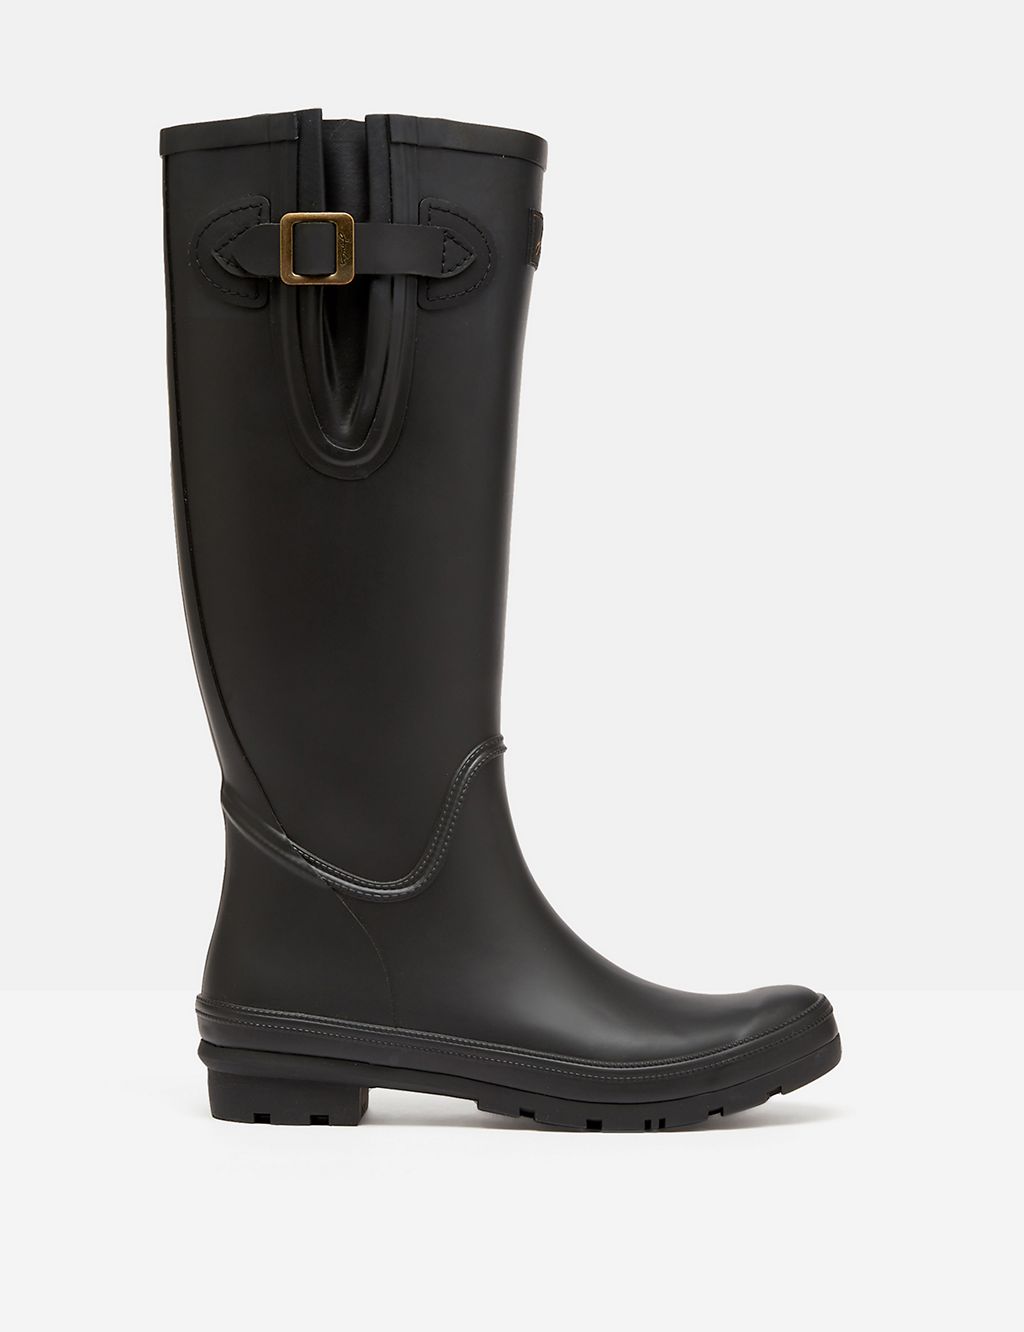 Wellies | Joules | M&S